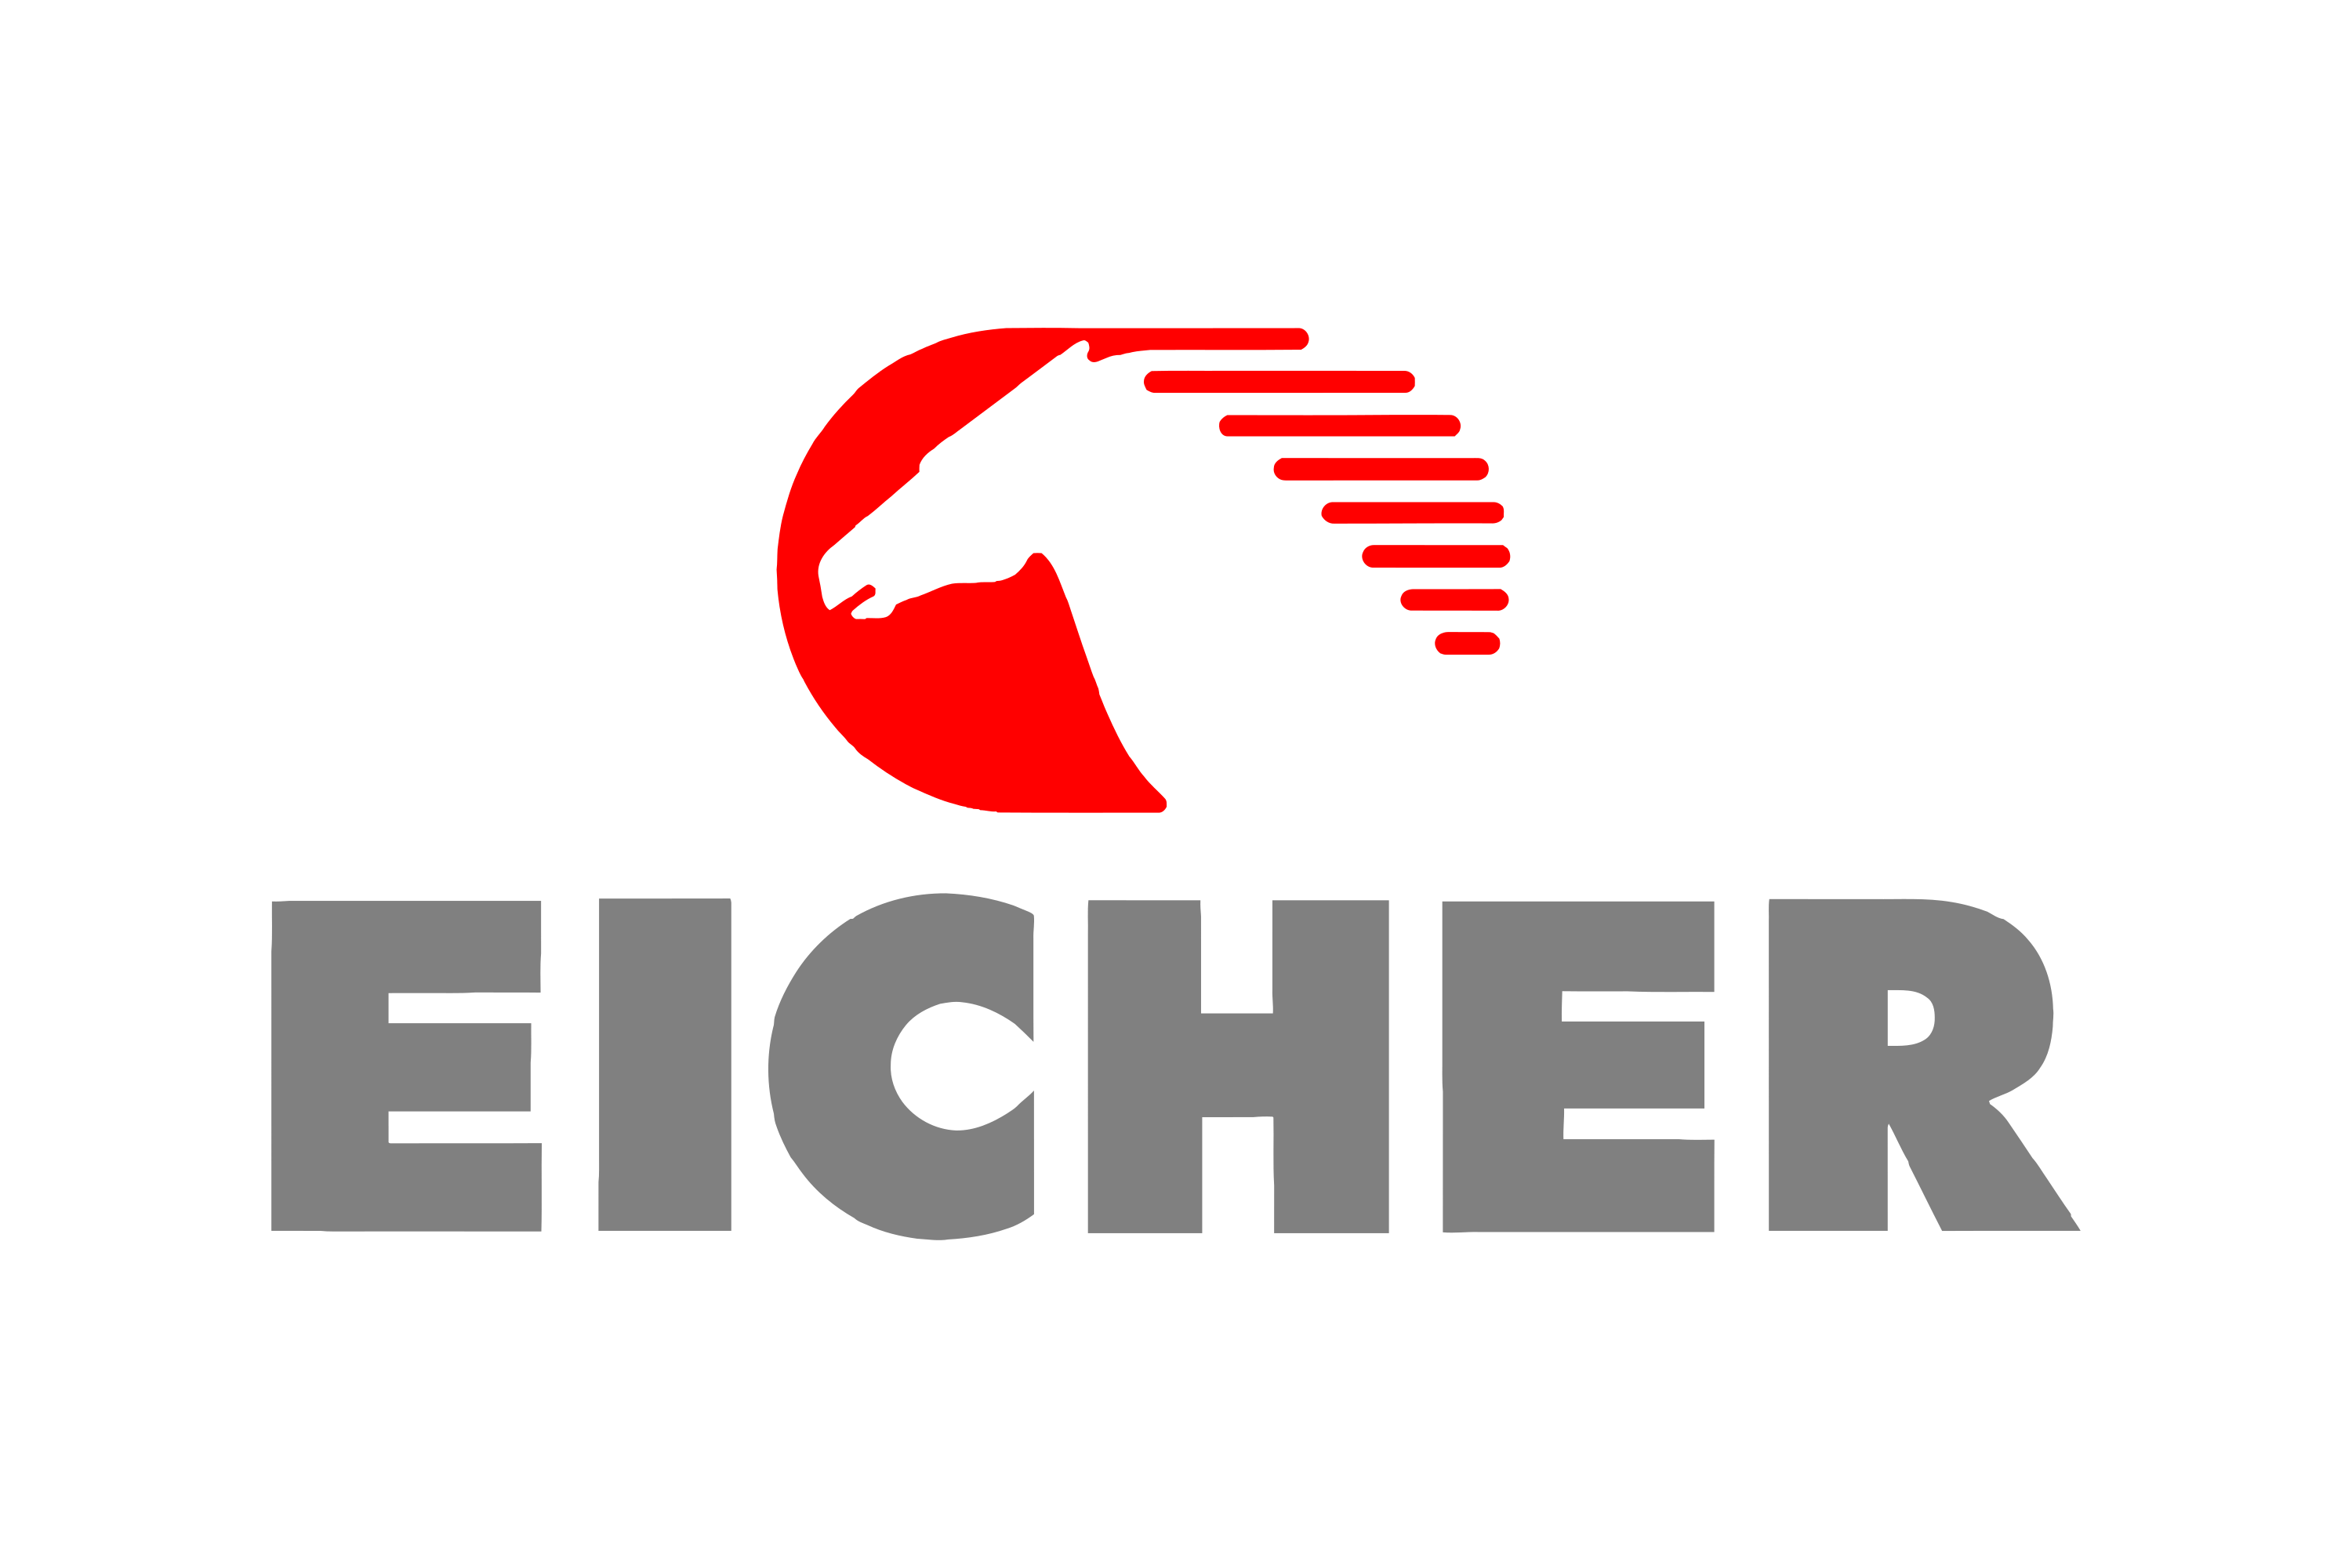 Download Eicher Motors (EICH.NS, EIM IN) Logo in SVG Vector or PNG File  Format - Logo.wine